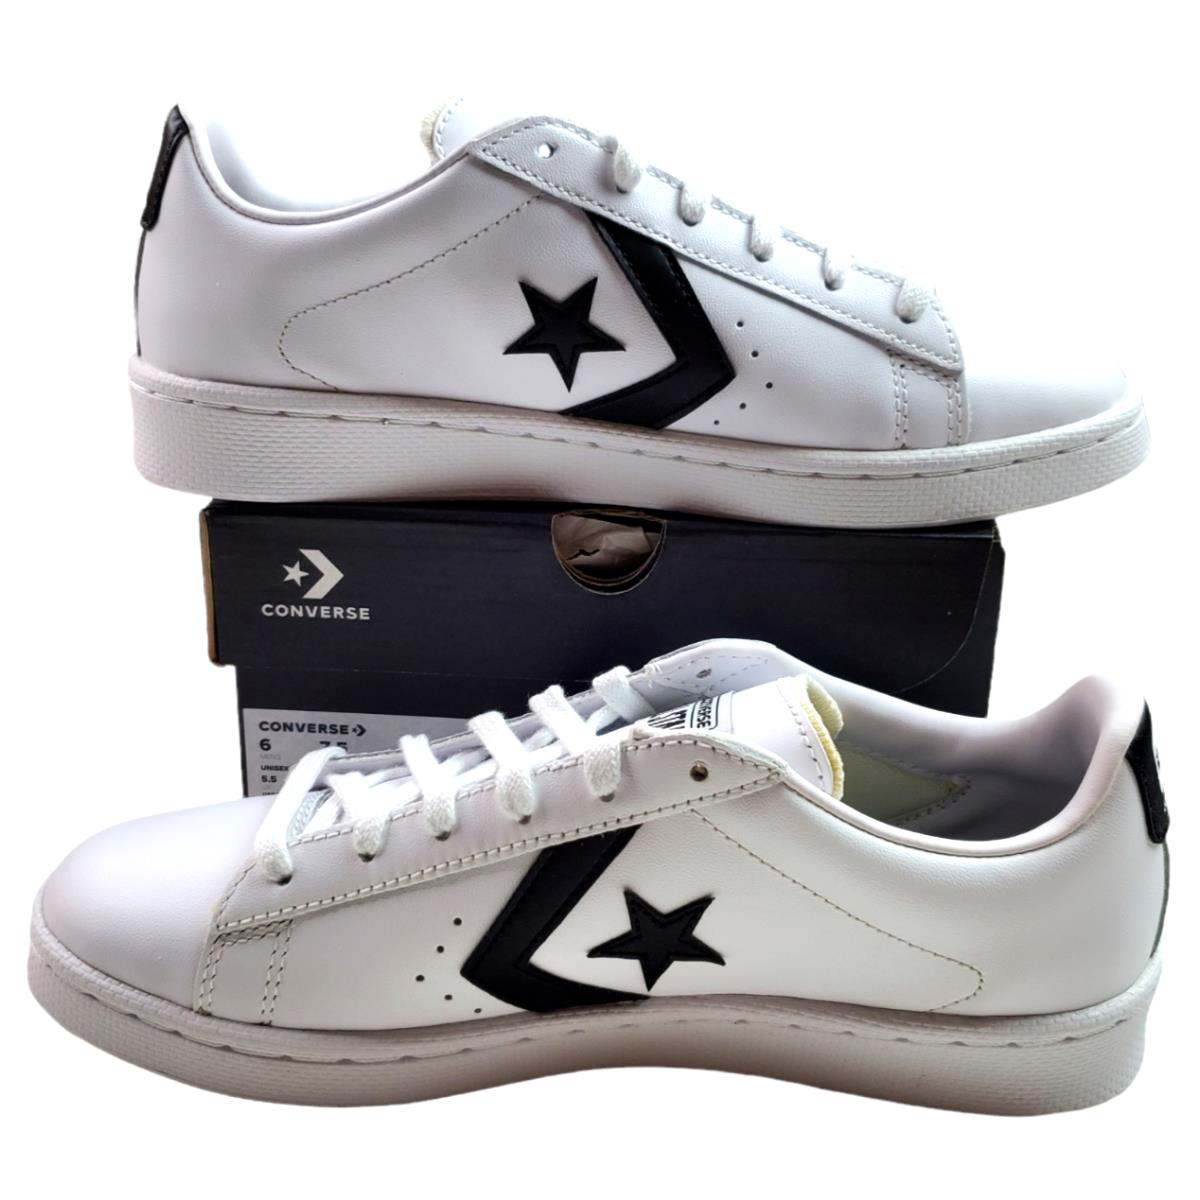 Converse Pro Leather Low OG Black White Shoes Sneakers Unisex Women`s Size 7.5